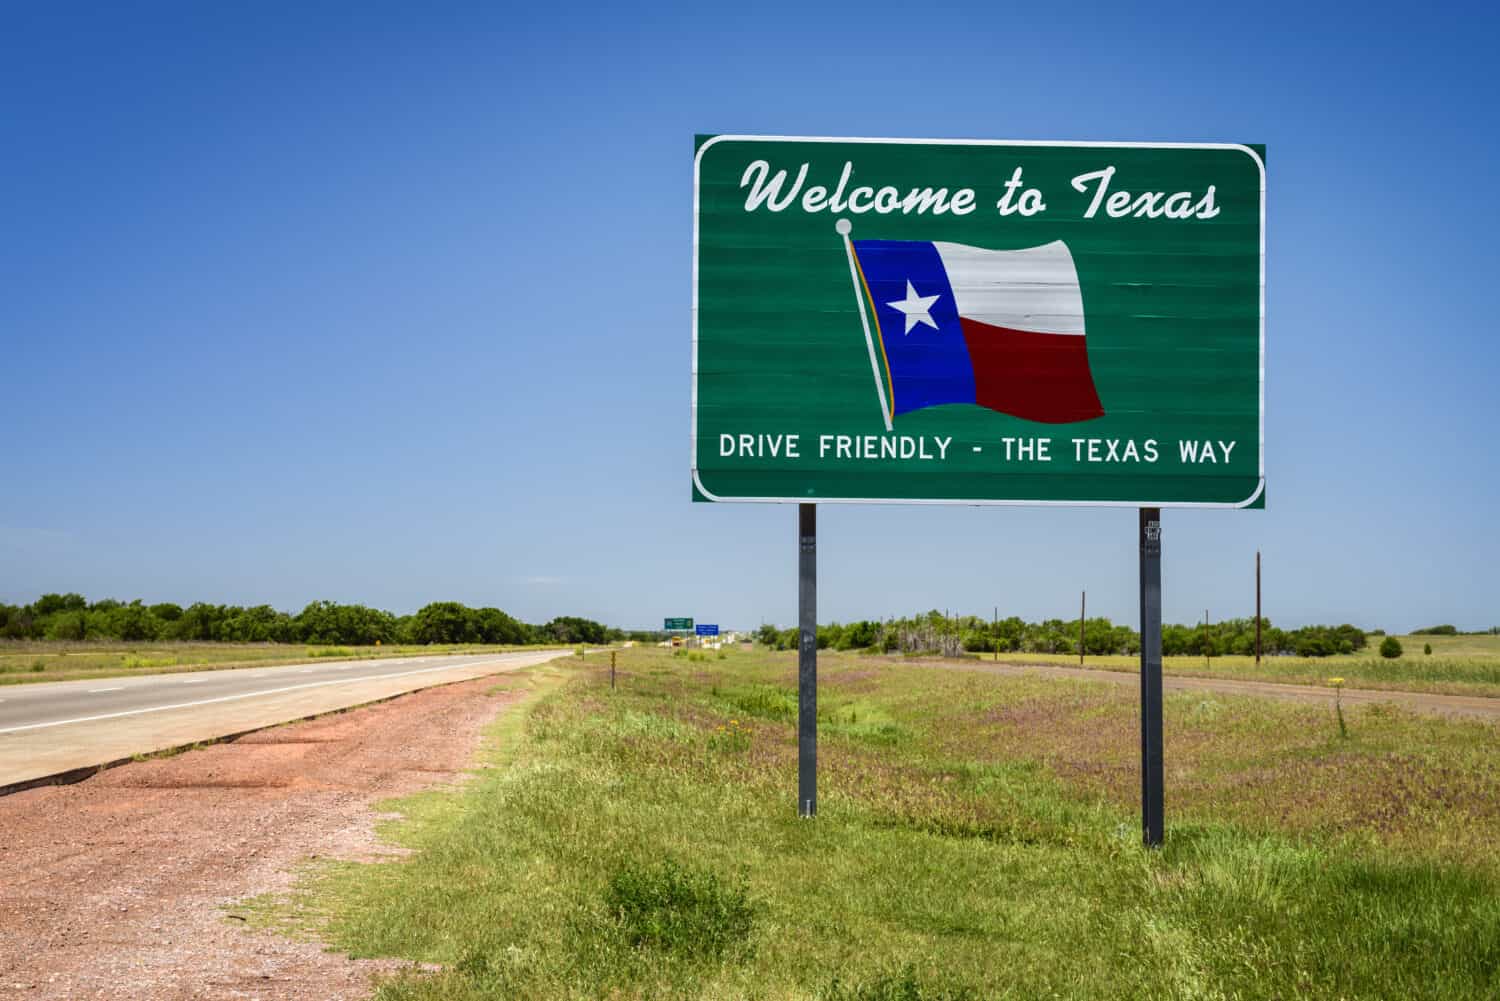 <p>When you think of states within the U.S. that are great for retirement, Texas undoubtedly comes to mind. Popular for so many reasons, Texas remains one of the <a href="https://247wallst.com/special-report/2024/02/26/americans-are-flocking-to-texas-from-these-states/?utm_source=msn&utm_medium=referral&utm_campaign=msn&utm_content=americans-are-flocking-to-texas-from-these-states&wsrlui=213709811">greatest places to live</a> for people of all ages. It is famous for its country music, barbecues, oil fields, cowboys, rodeos, and state fairs. In other words, Texas has it all.</p> <p>If you're looking to retire in the near future, making Texas one of your choices should be top of mind. Along with everything mentioned above, you have great weather, plenty of large cities, a diverse landscape, and all the land you could ever want.</p> <p>Using data compiled from expert sites like <a href="https://www.niche.com/places-to-live/search/best-places-to-retire/s/texas/" rel="noopener">Niche</a>, let's take a look at the best cities you can find in Texas for retirement in descending order.</p> <div class='fwpPitch'><h2><b>ALERT: Today Could Be Your Best Shot At Early Retirement (Sponsored)</b></h2> <p>If you want to retire before 65, pay attention. Study after study has shown that the longer you stay invested, the better your chances at an early retirement.</p> <p>Every day that goes by without saving and investing for tomorrow means more to earn and save later. Don’t waste any more time and get started with Robinhood today. The app makes it easy to buy and sell stocks, mutual funds, trade options, and even cryptocurrencies.</p> <p>Sign up today — <a href="https://robinhood.c3me6x.net/c/4623803/662405/10402" rel="noopener nofollow sponsored">click here to start your journey.</a></p> </div><p>Agree with this? Hit the Thumbs Up button above. Disagree? Let us know in the comments with what you'd change.</p>